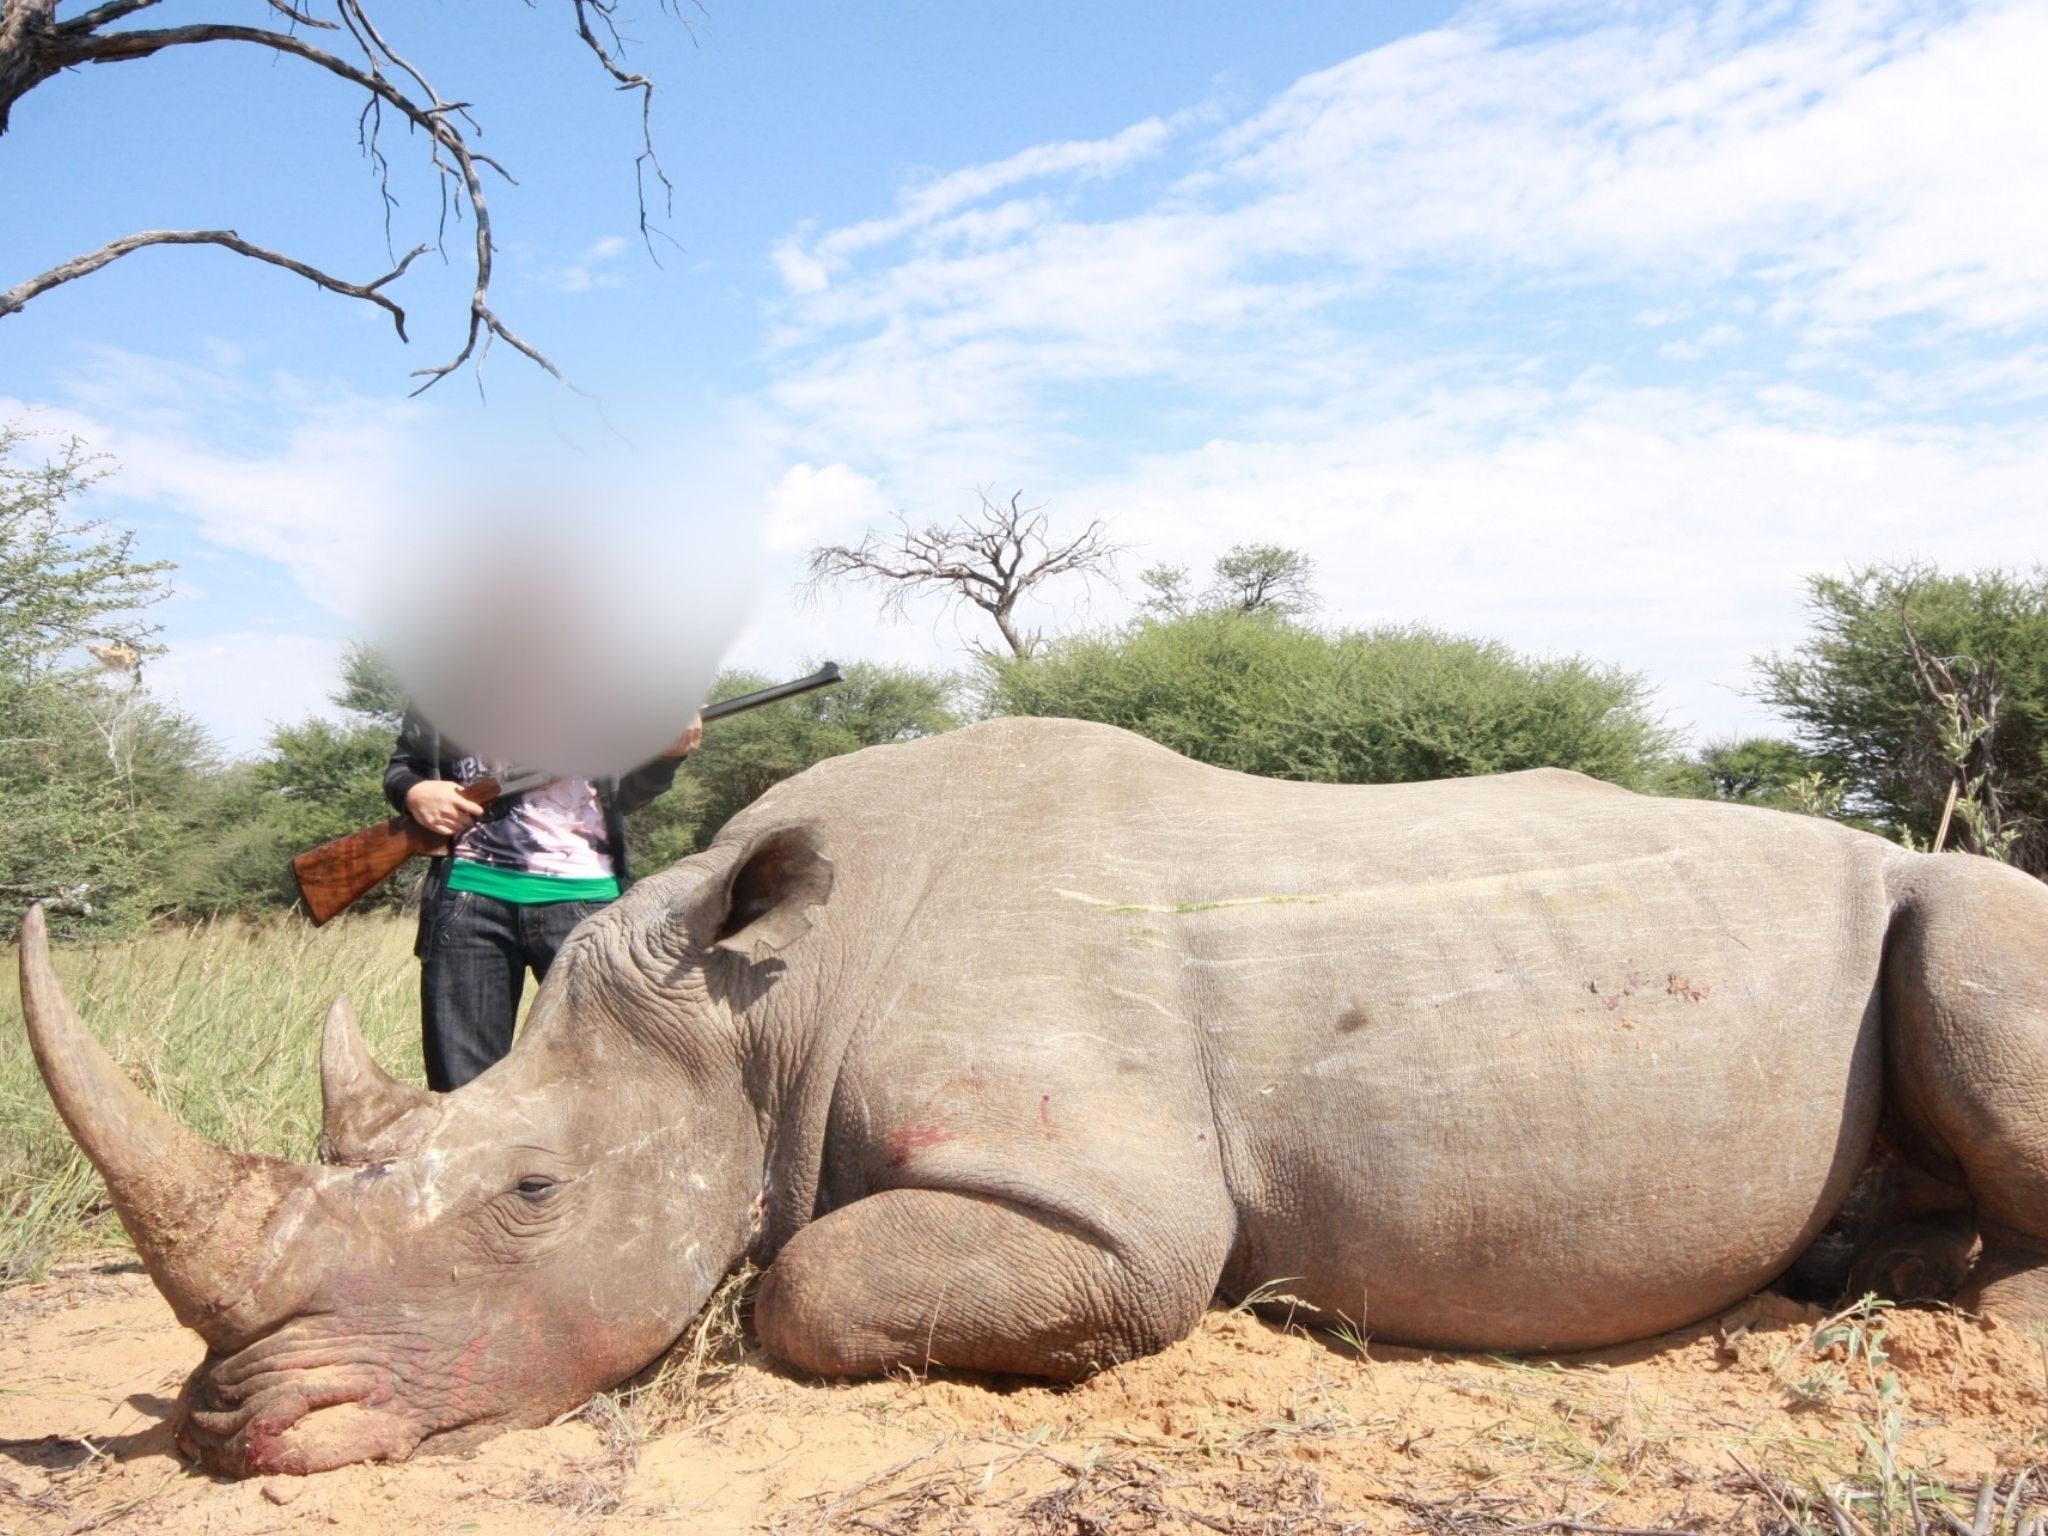 A trafficked sex-worker posing with a rhino in South Africa